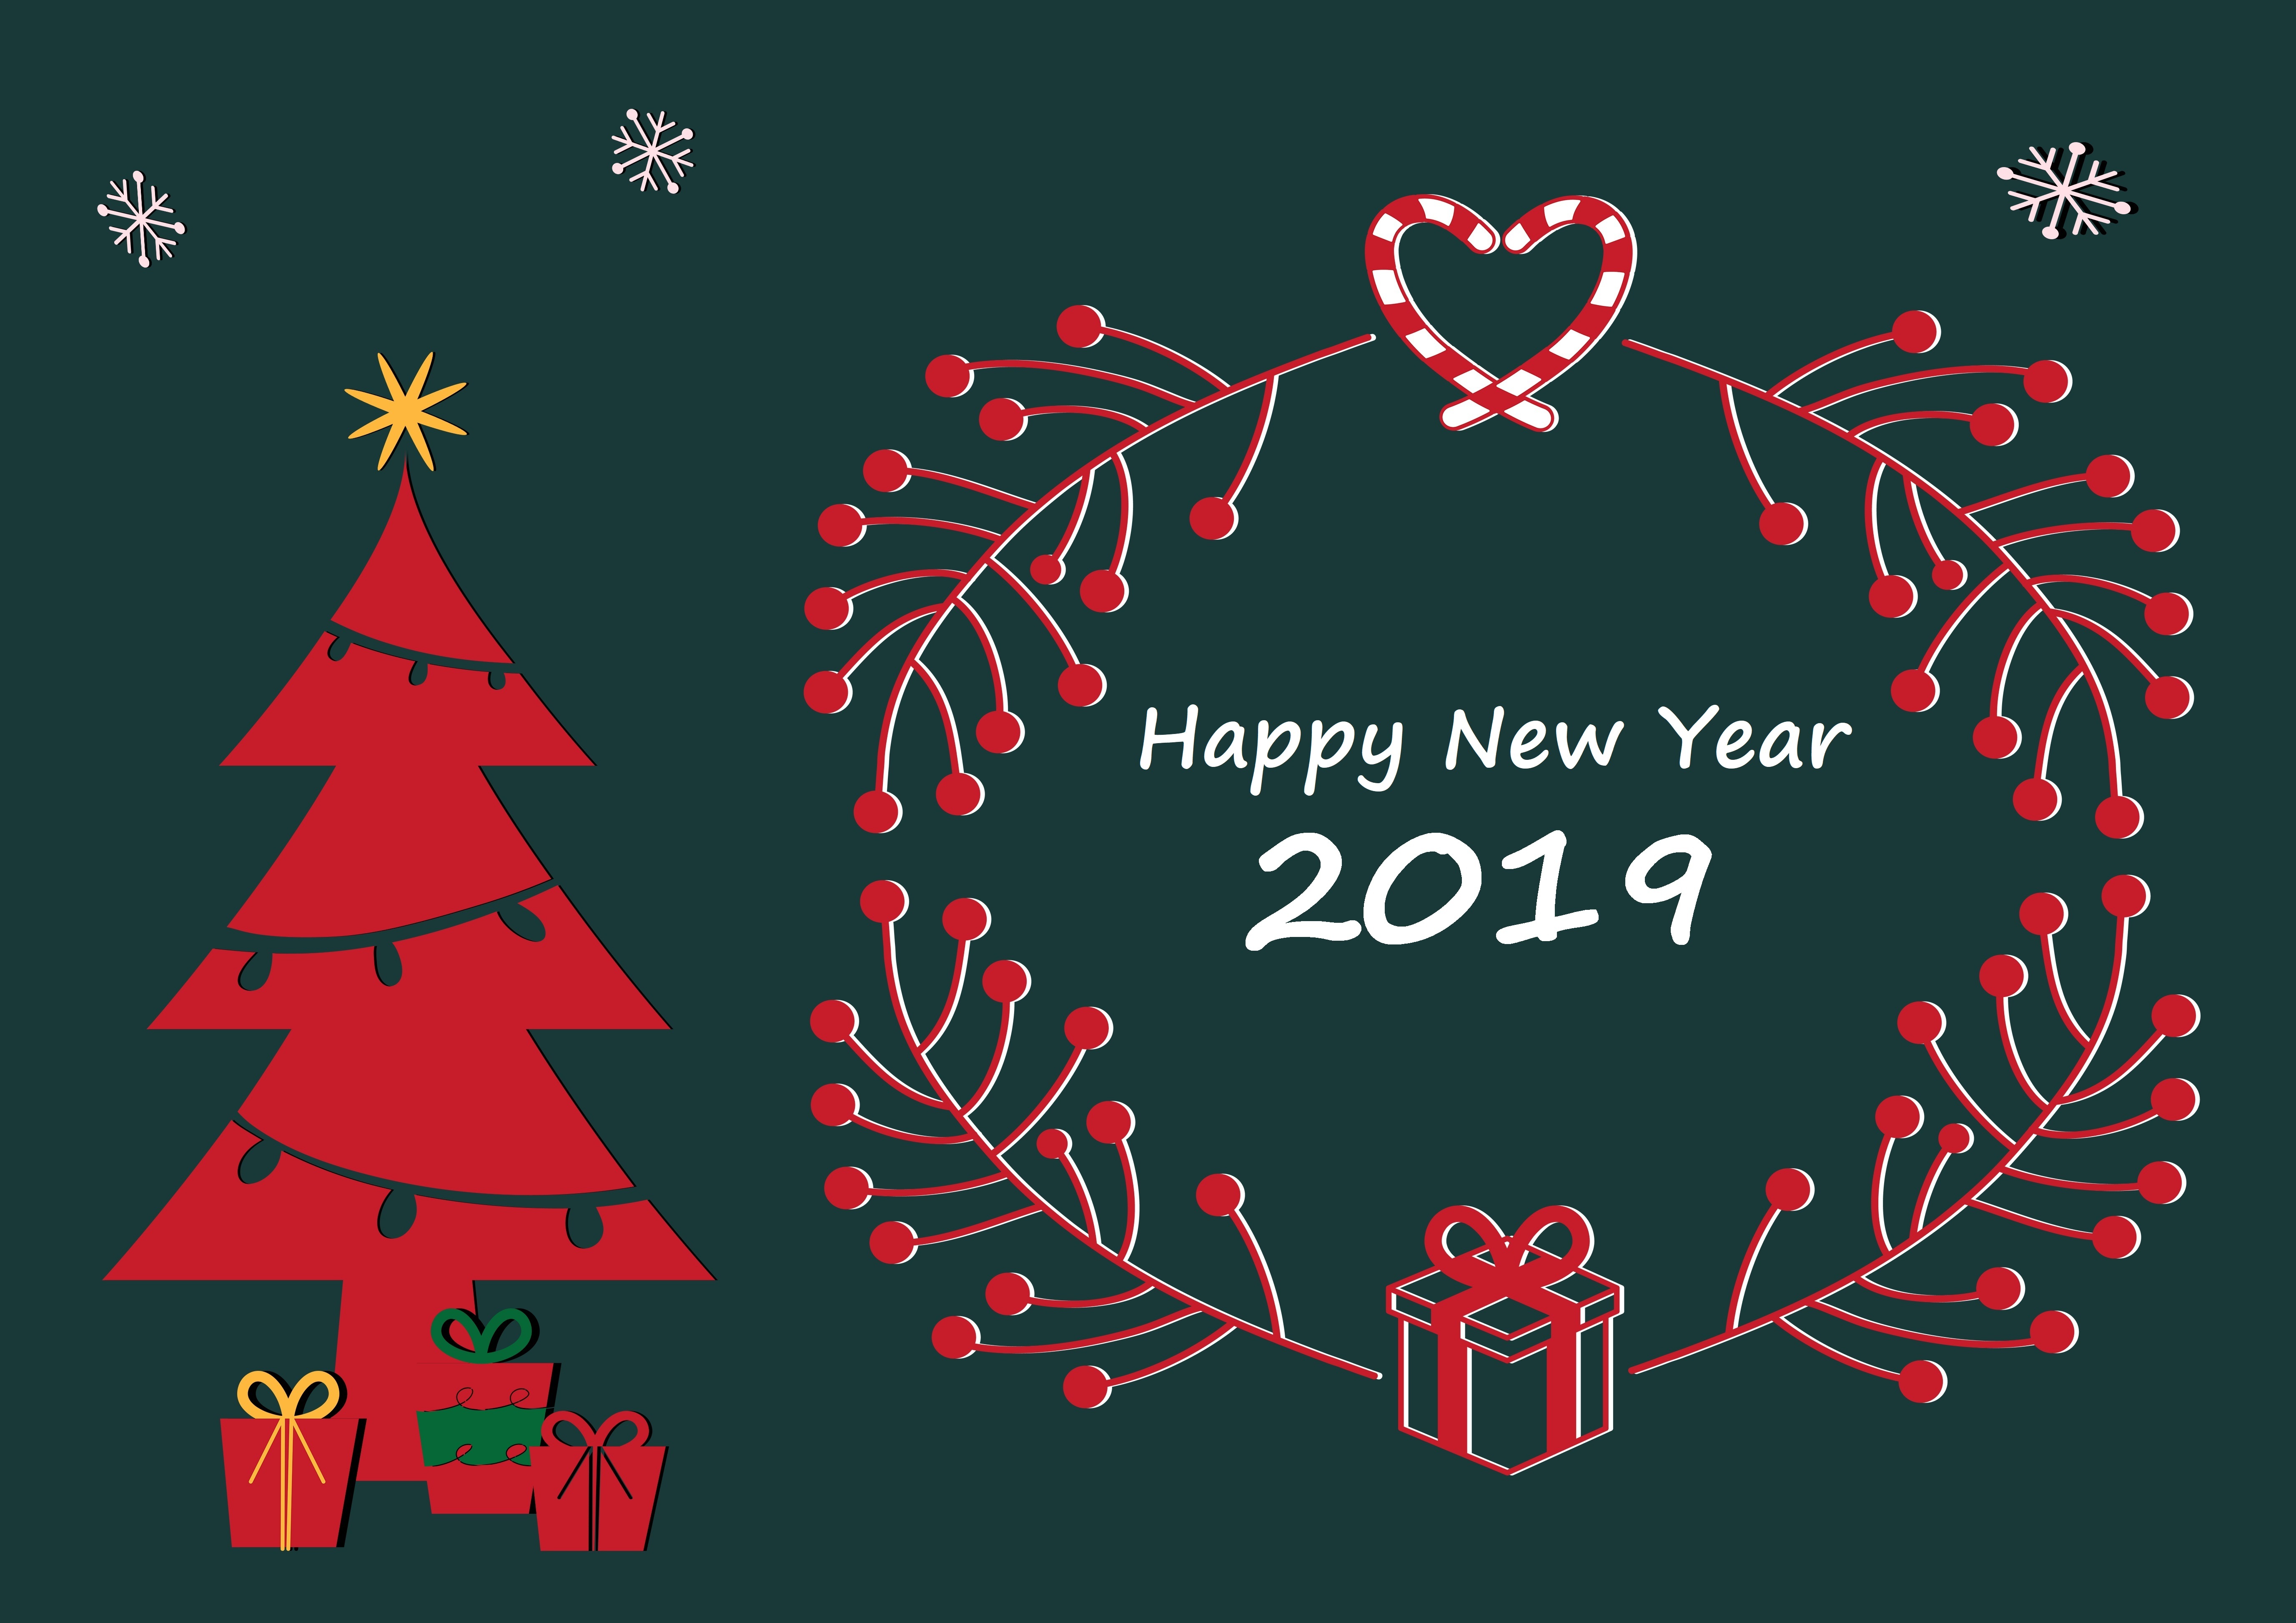 Happy New Year and Merry Christmas 2019 Wallpaper HD Holidays 4K